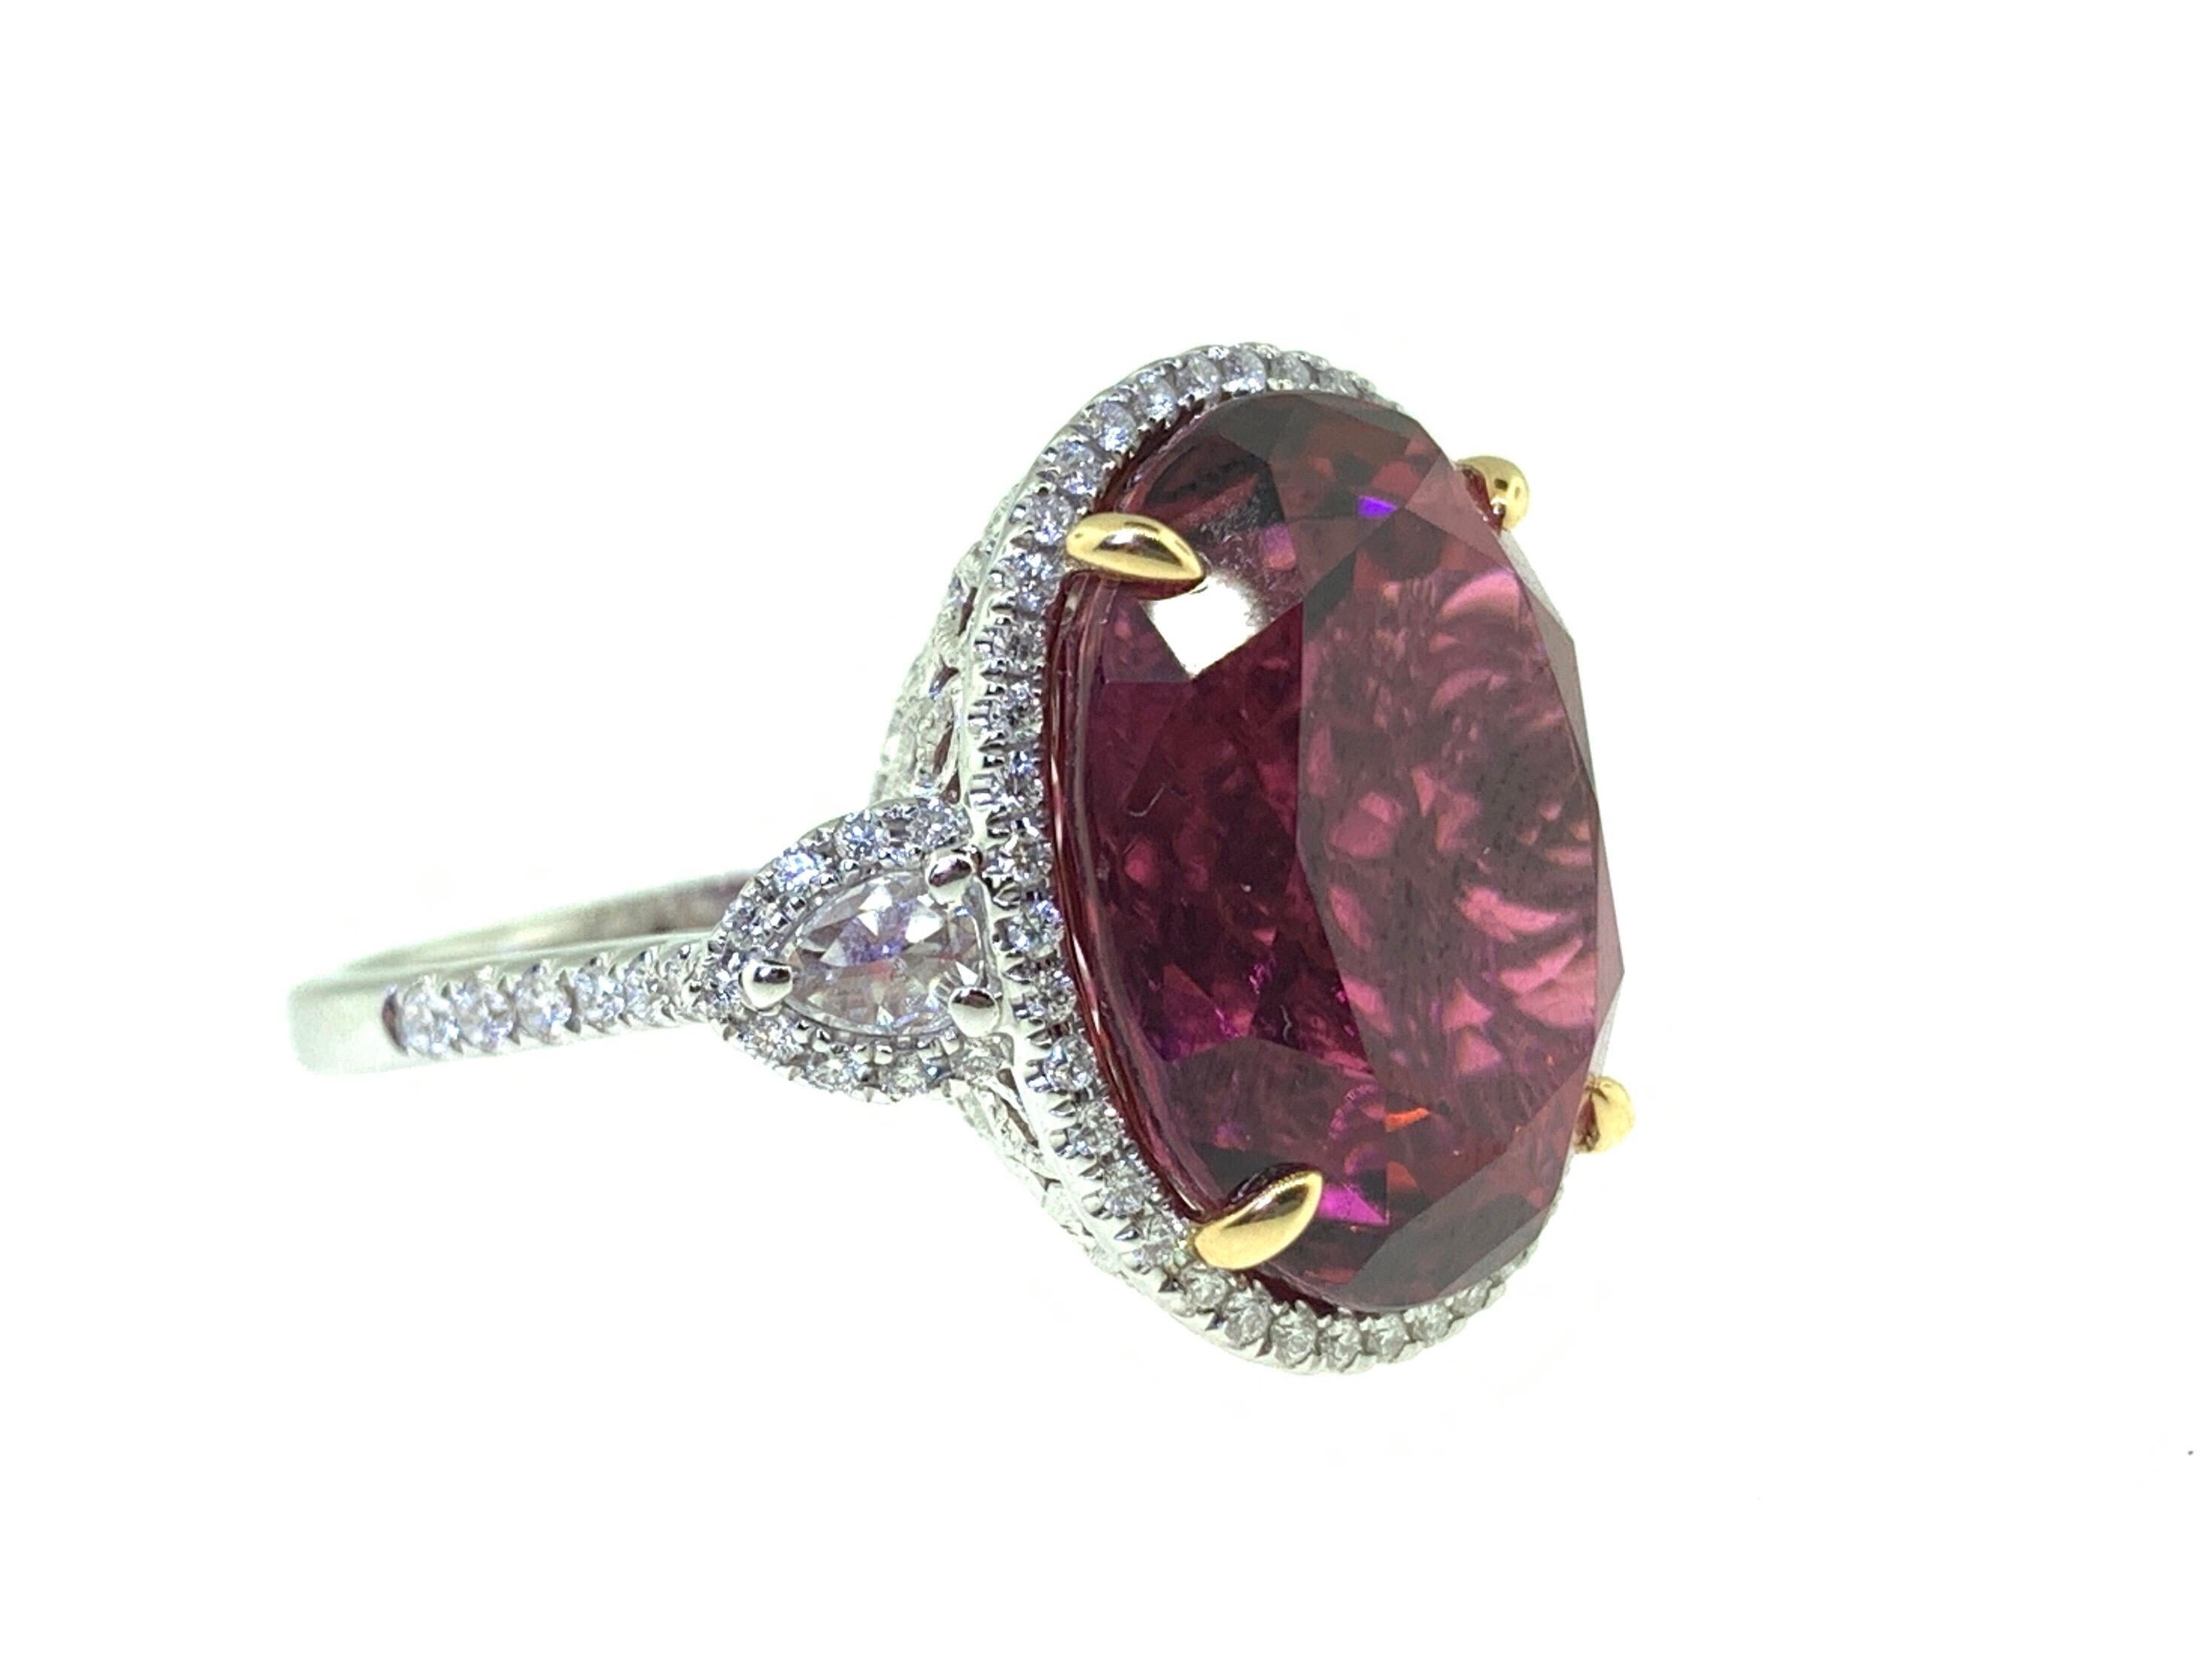 This stunning cocktail ring showcases a large 15.65 Carat Oval Rubellite Tourmaline with a Diamond Halo. The Rubellite is flanked by two Rose Cut White Diamonds and is set in 18k white gold, with 18k yellow gold prongs on the center stone. Total